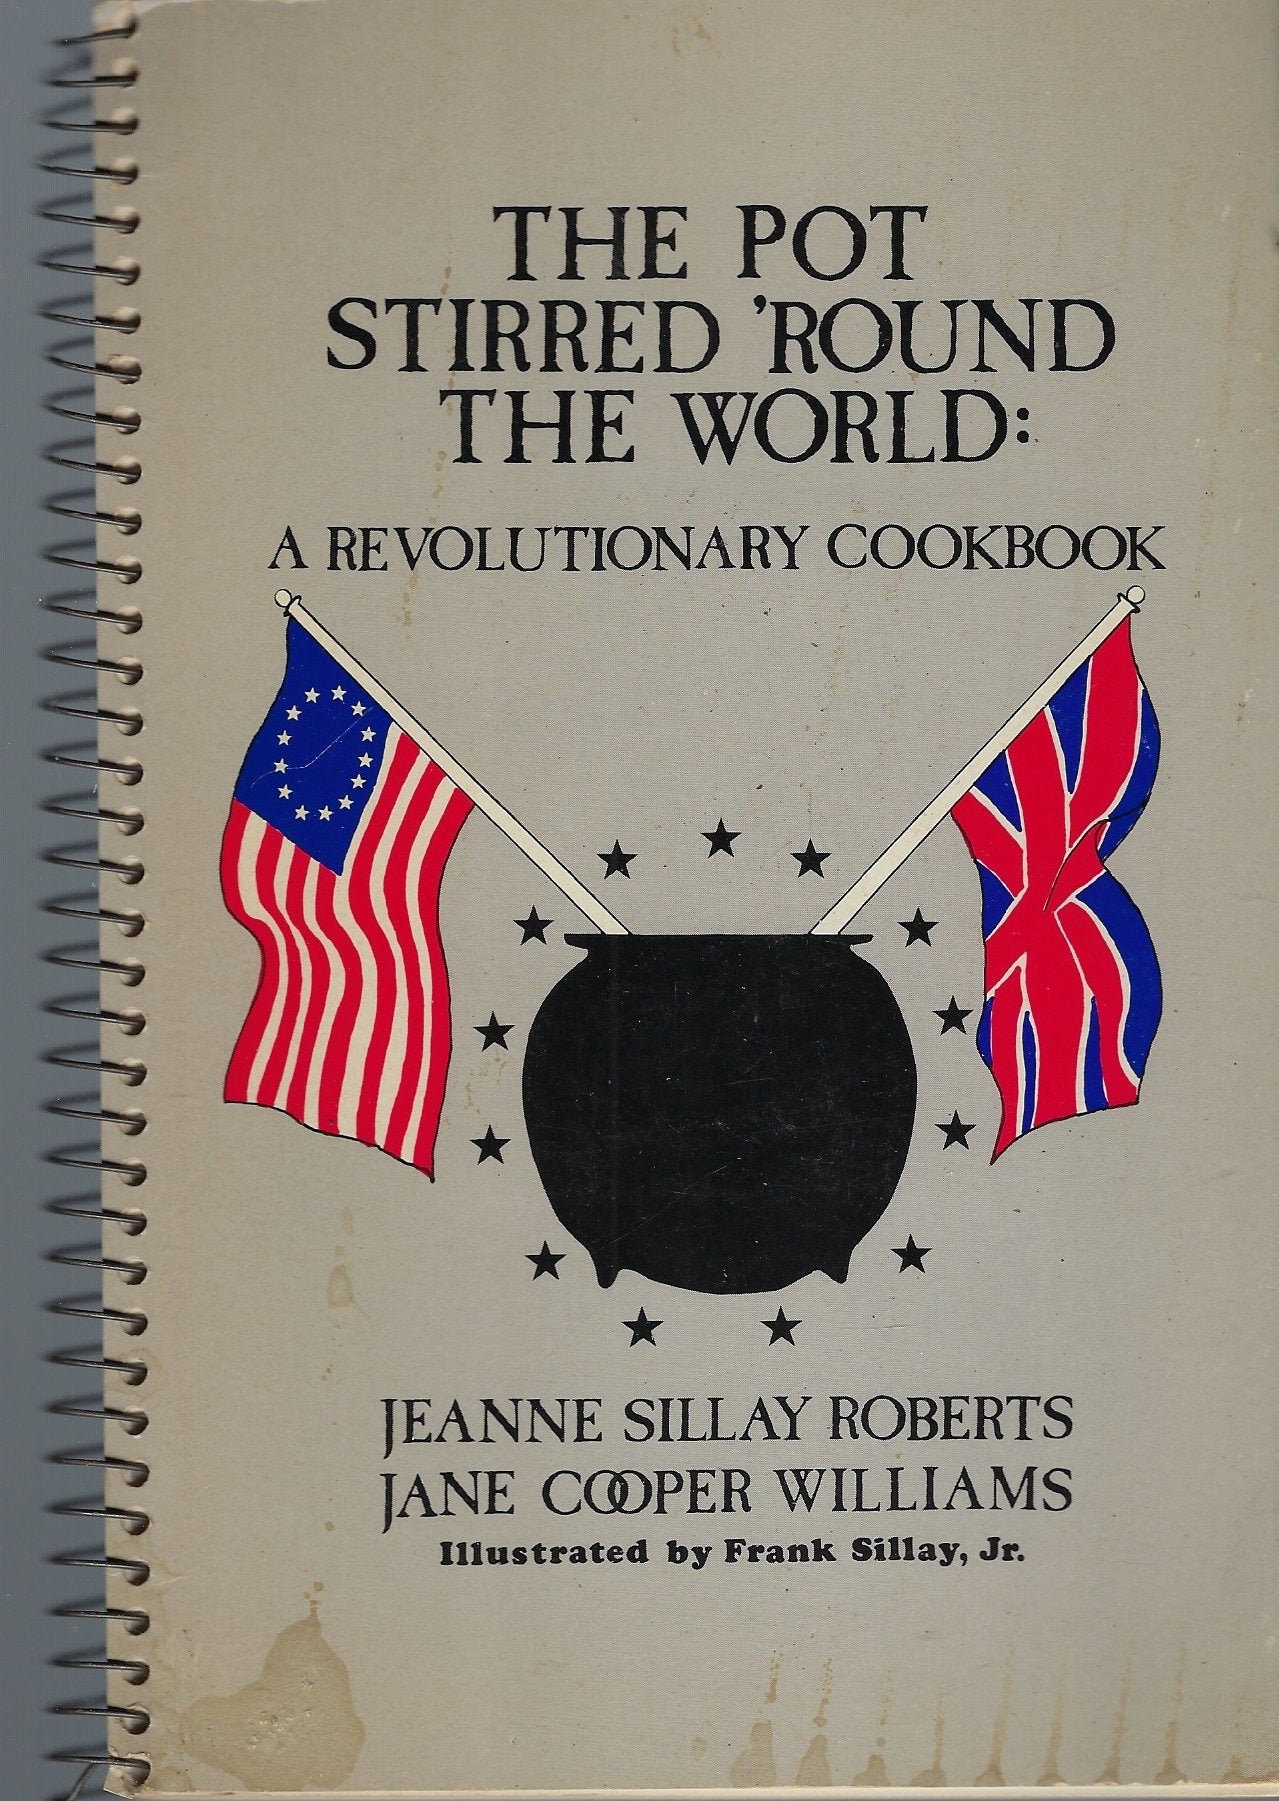 The Pot Stirred Round World - A Revolutionary War Cookbook Vintage 1976 By Jeanne Sillay Roberts & Jane Cooper Williams Recipes History